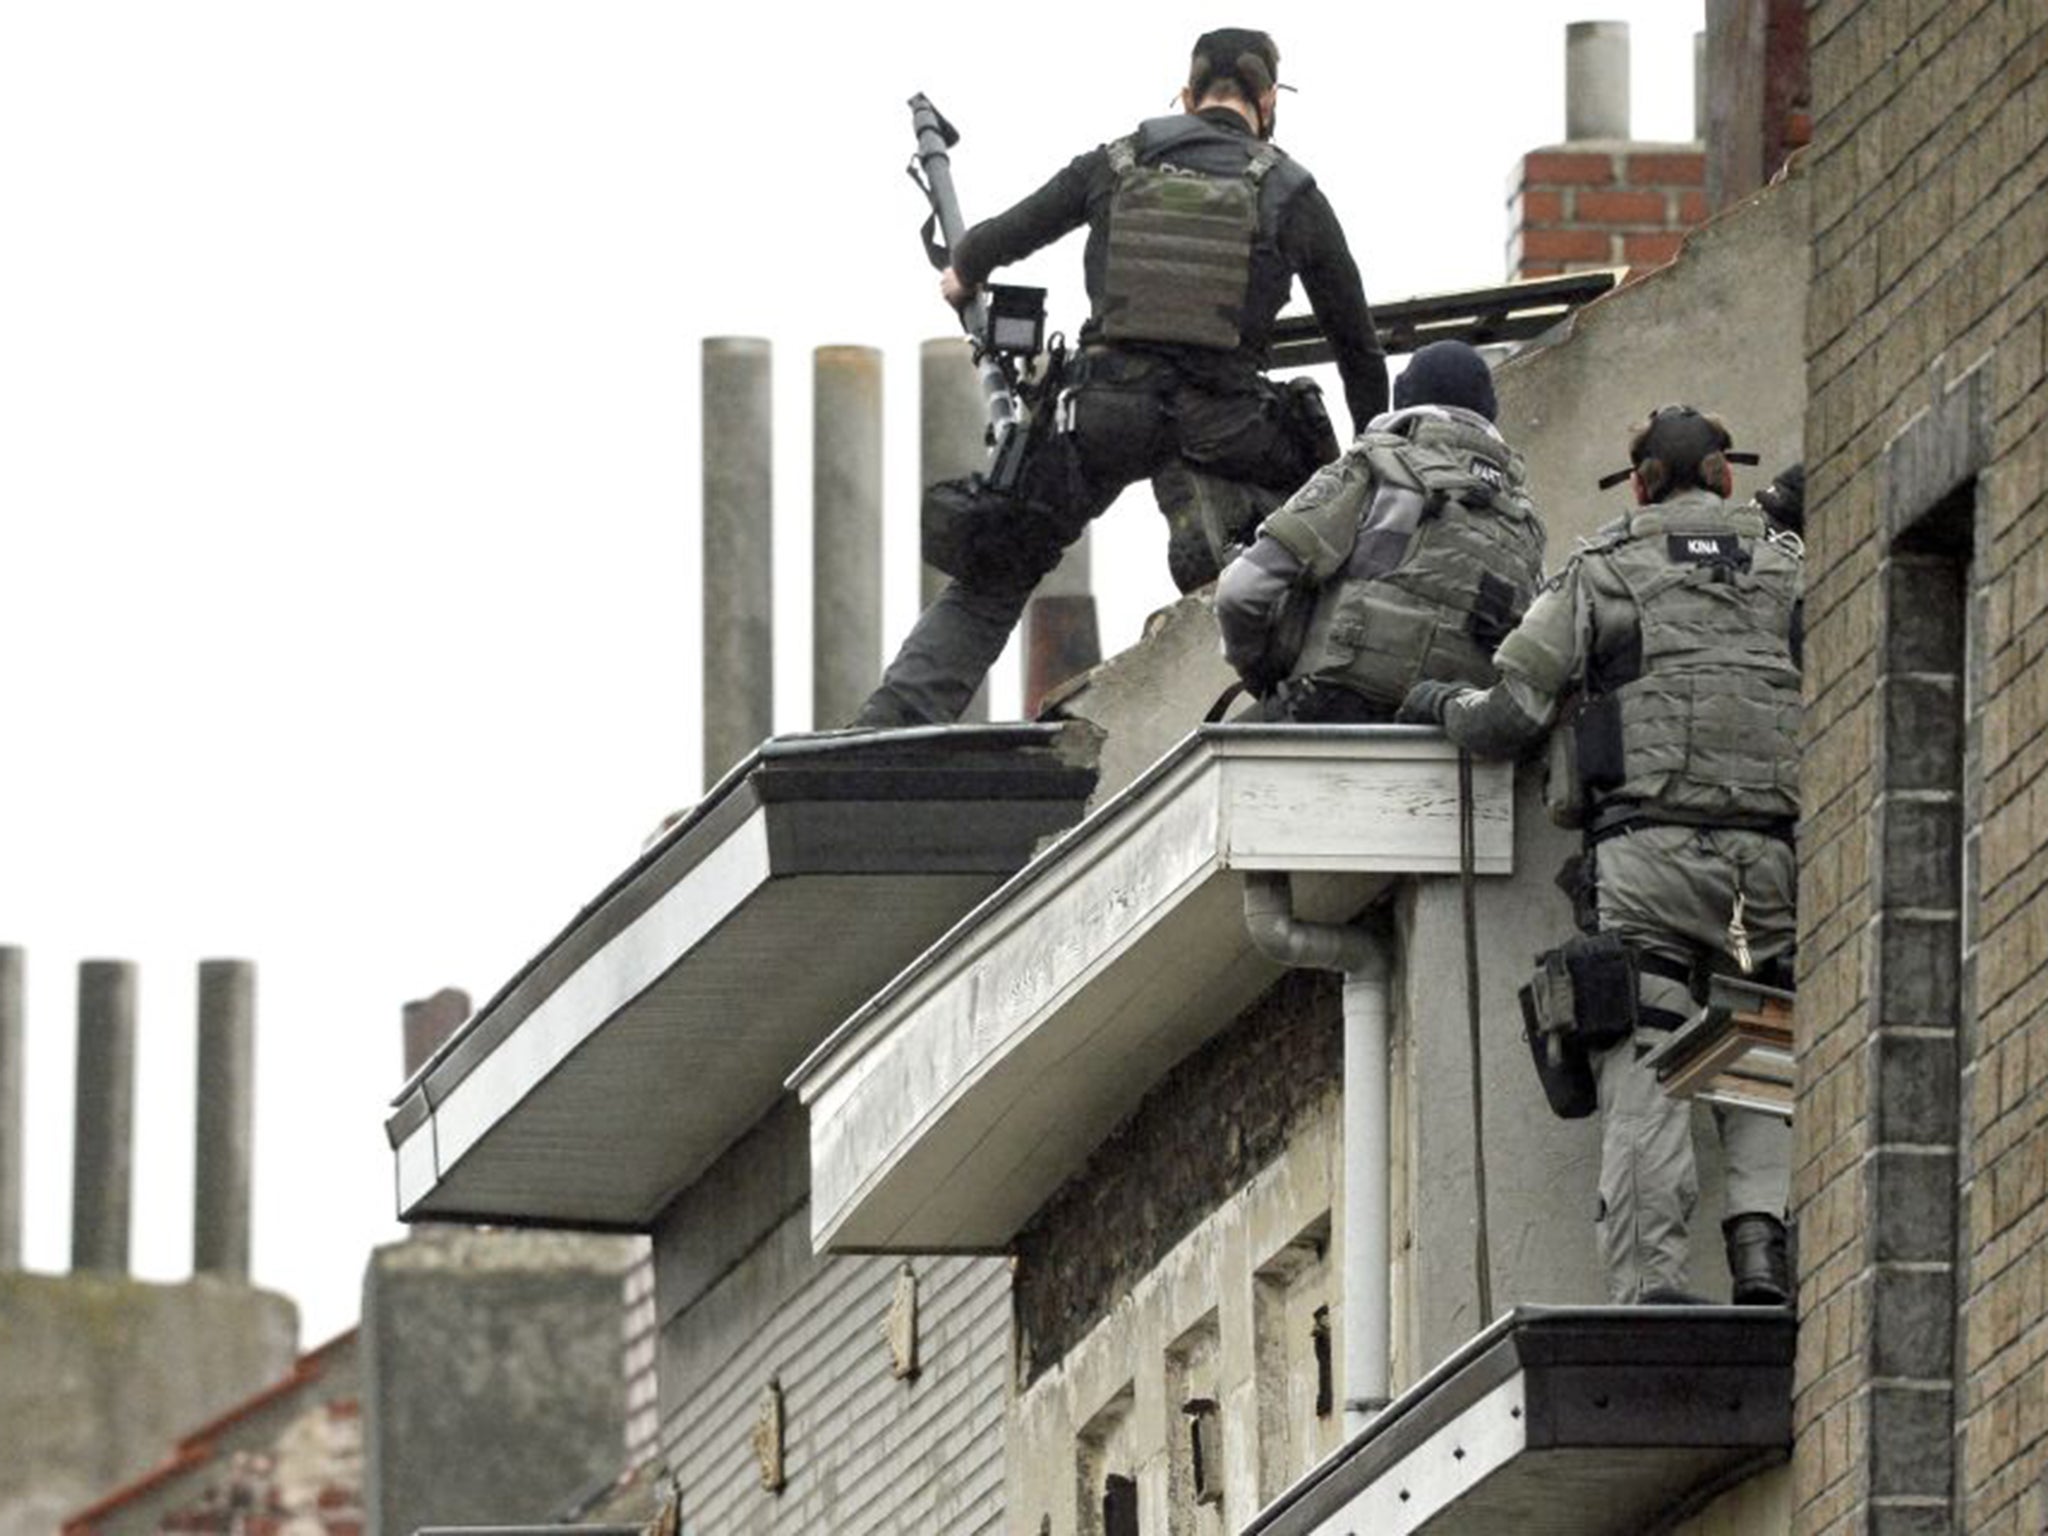 Special forces outside a house being searched in Brussels on Monday